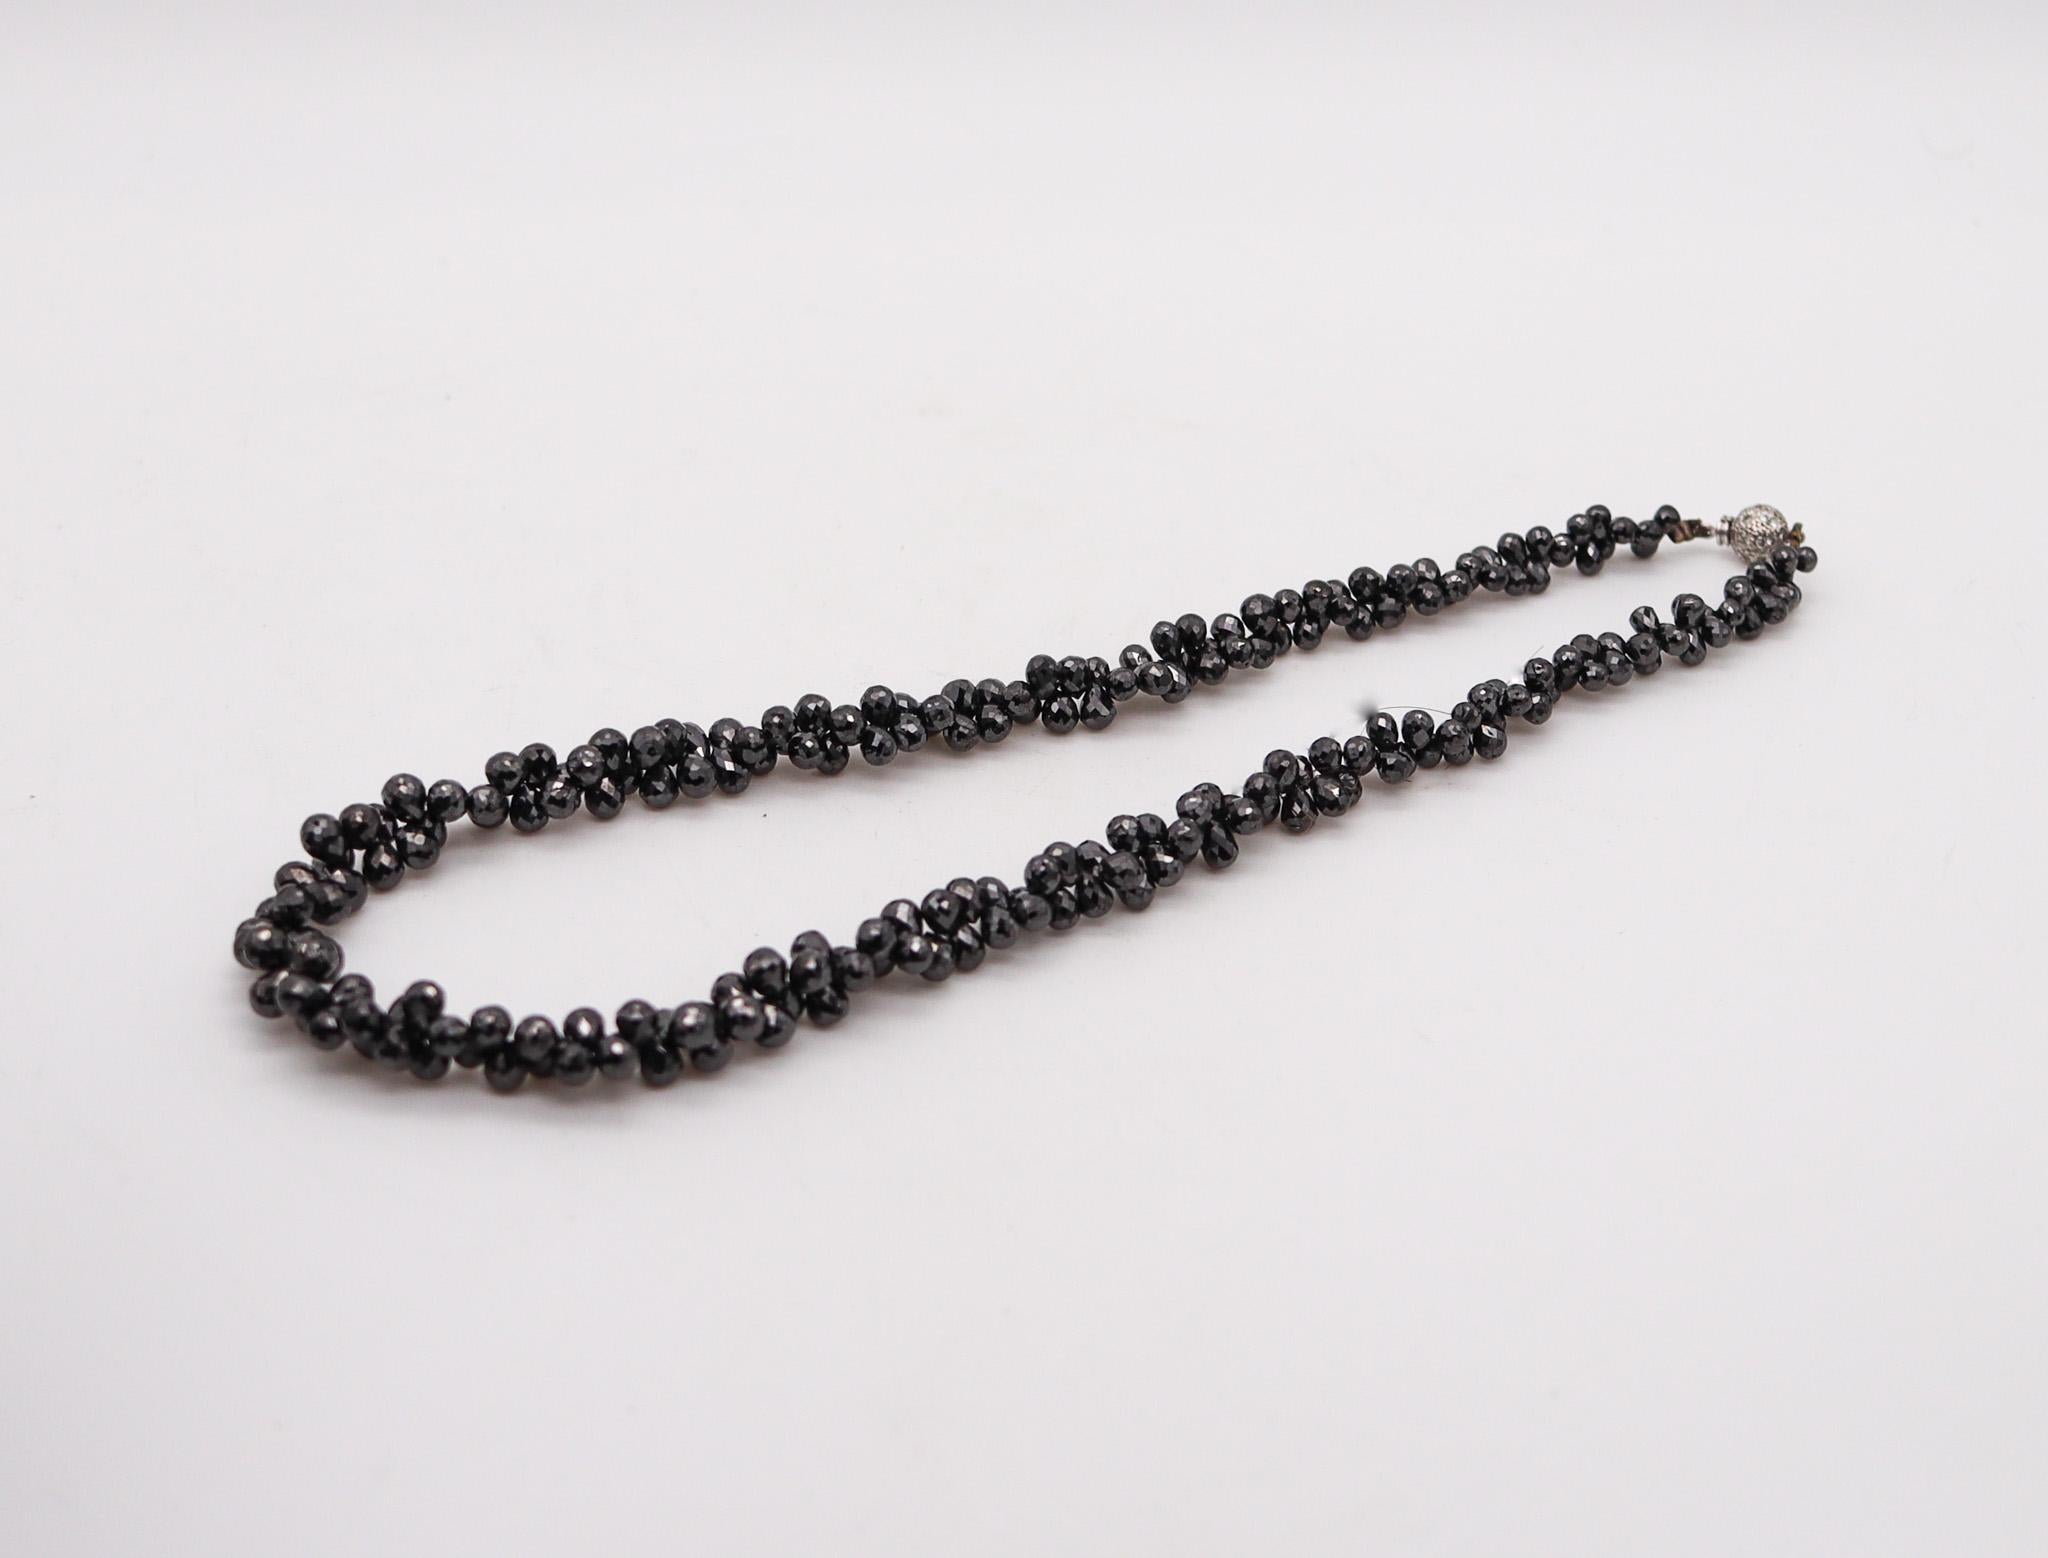 Modernist Contemporary Necklace With Black Diamonds In 14Kt Gold 180.40 Ctw Briolettes Cut